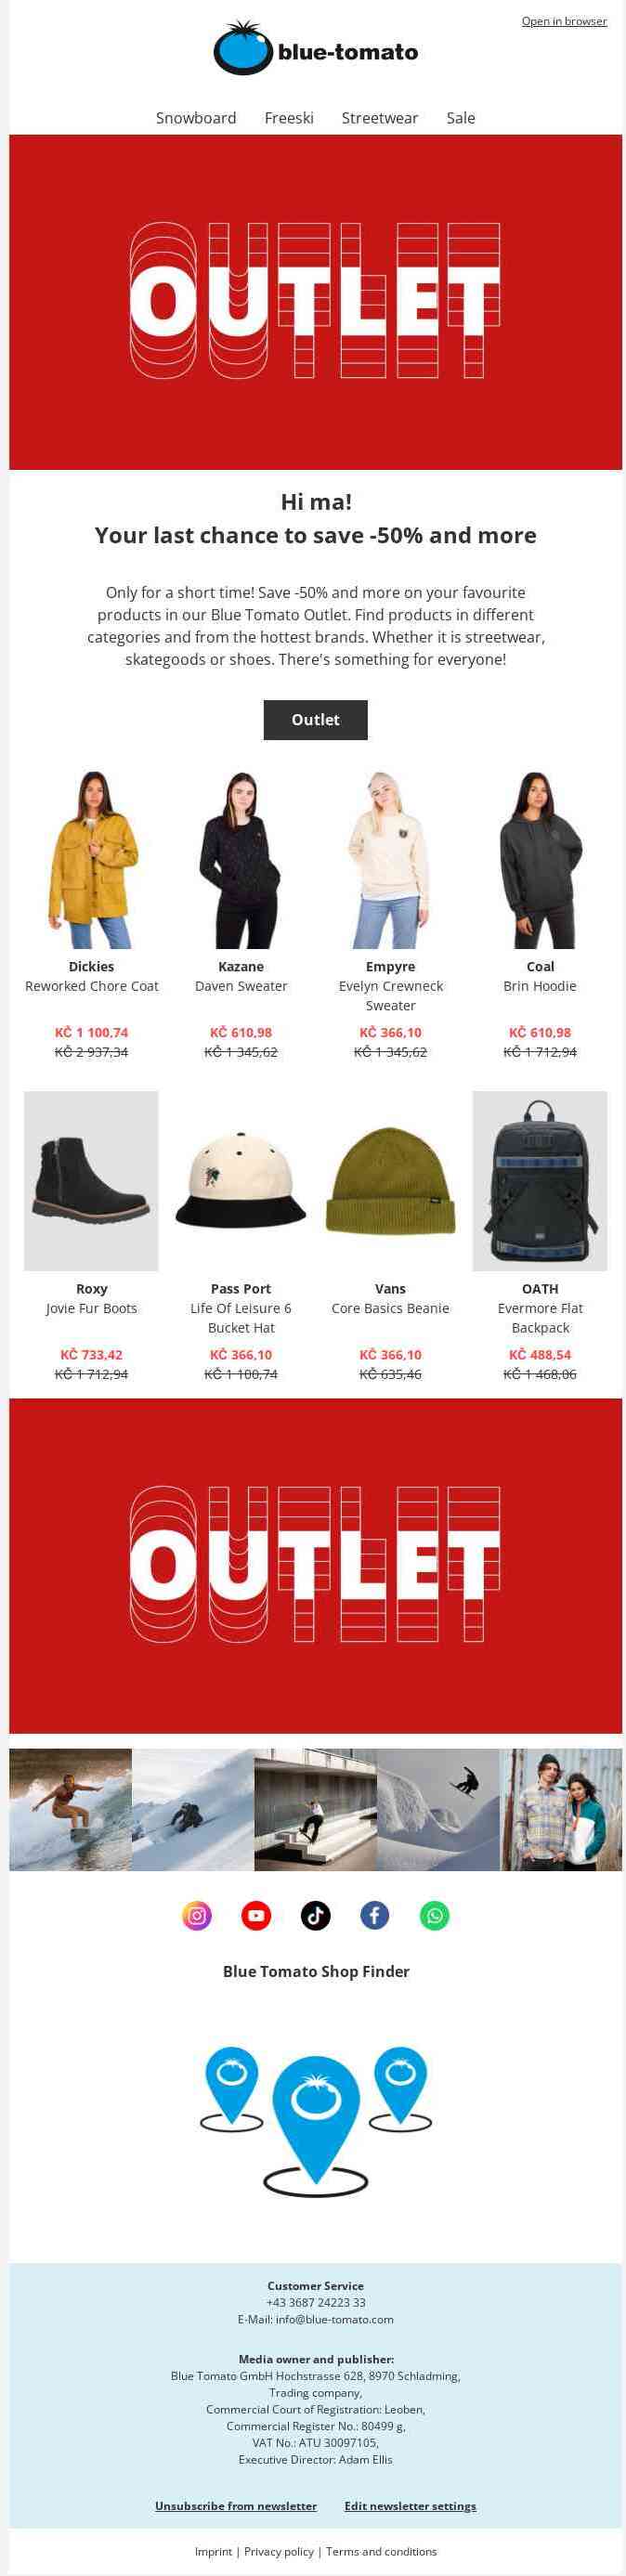 Last chance: -50% in the Outlet Sale